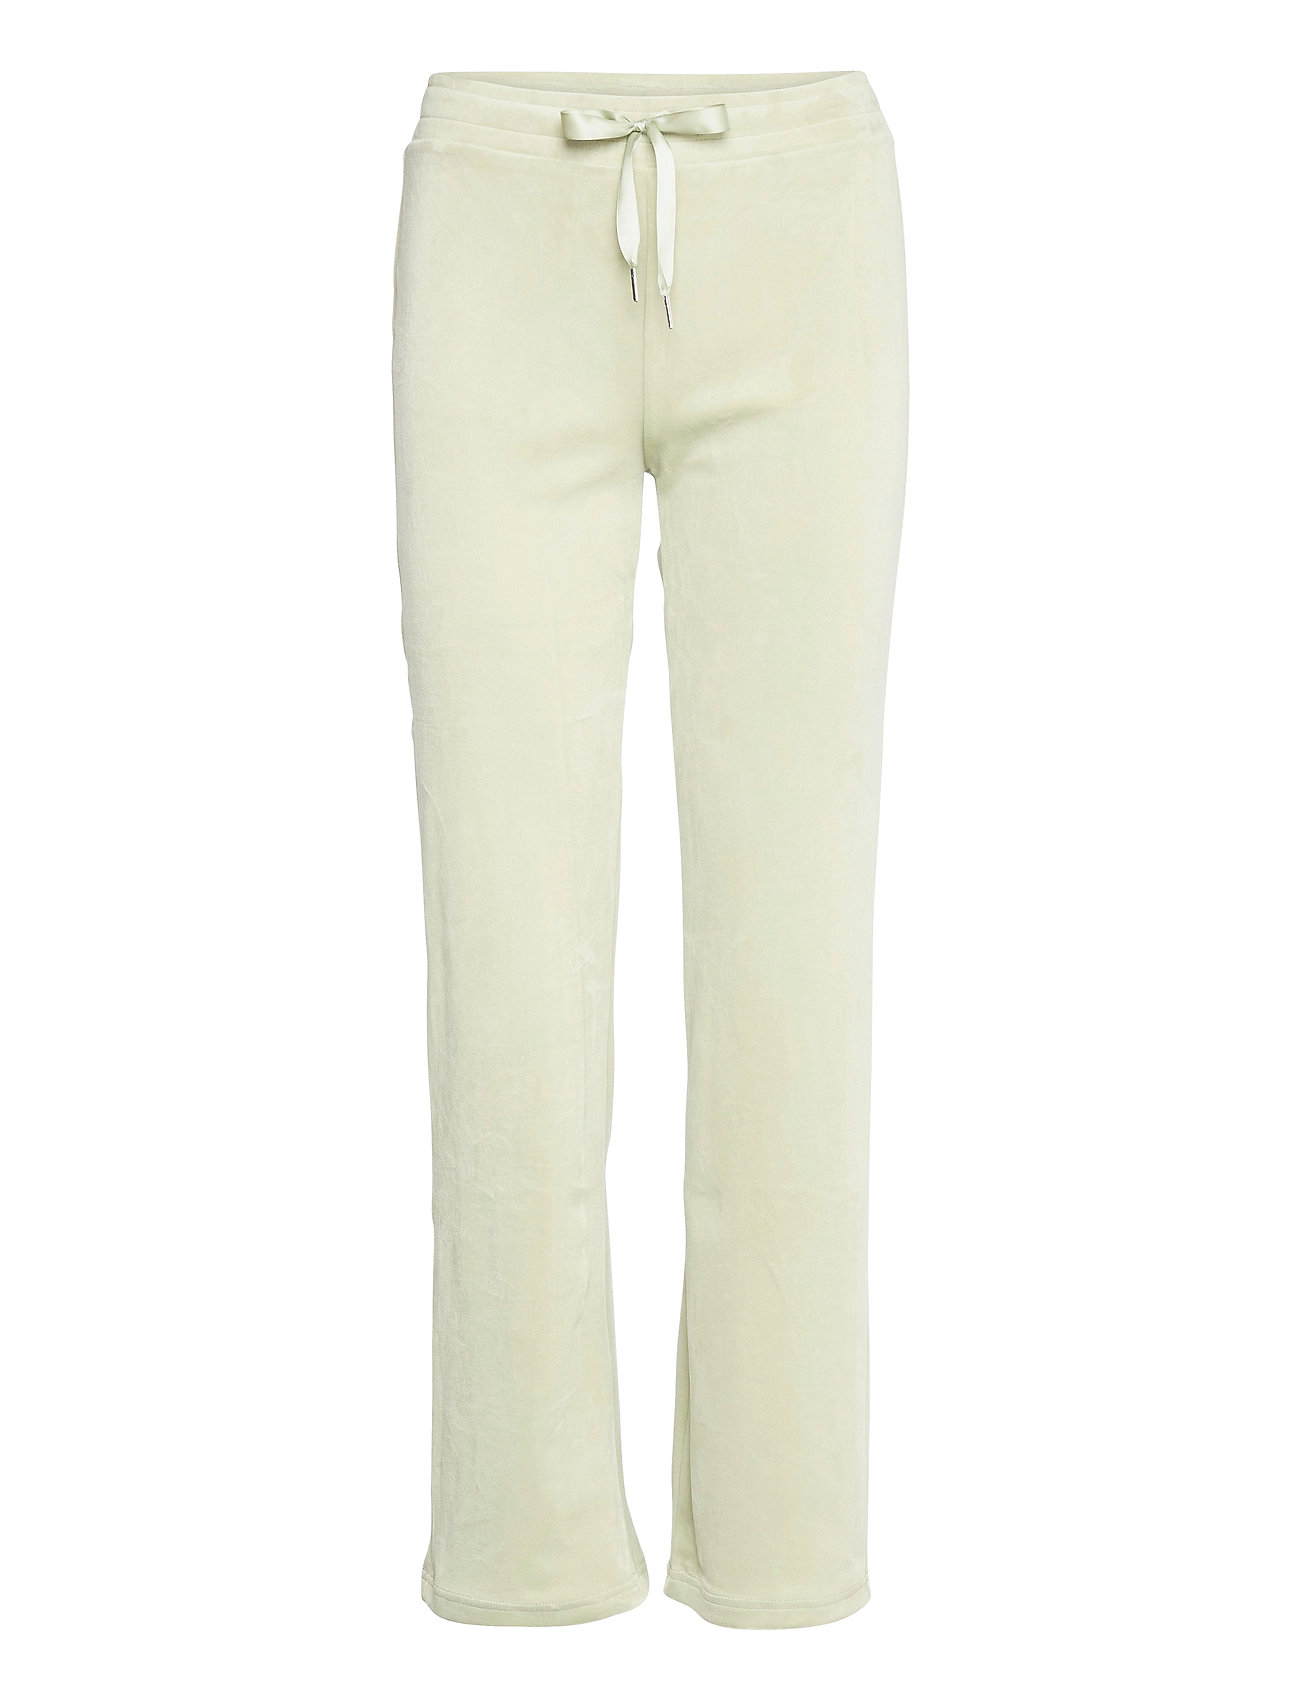 Cecilia Velour Trousers Casual Bukser Tricot casual Bukser fra Gina Tricot til dame i Sort - Pashion.dk